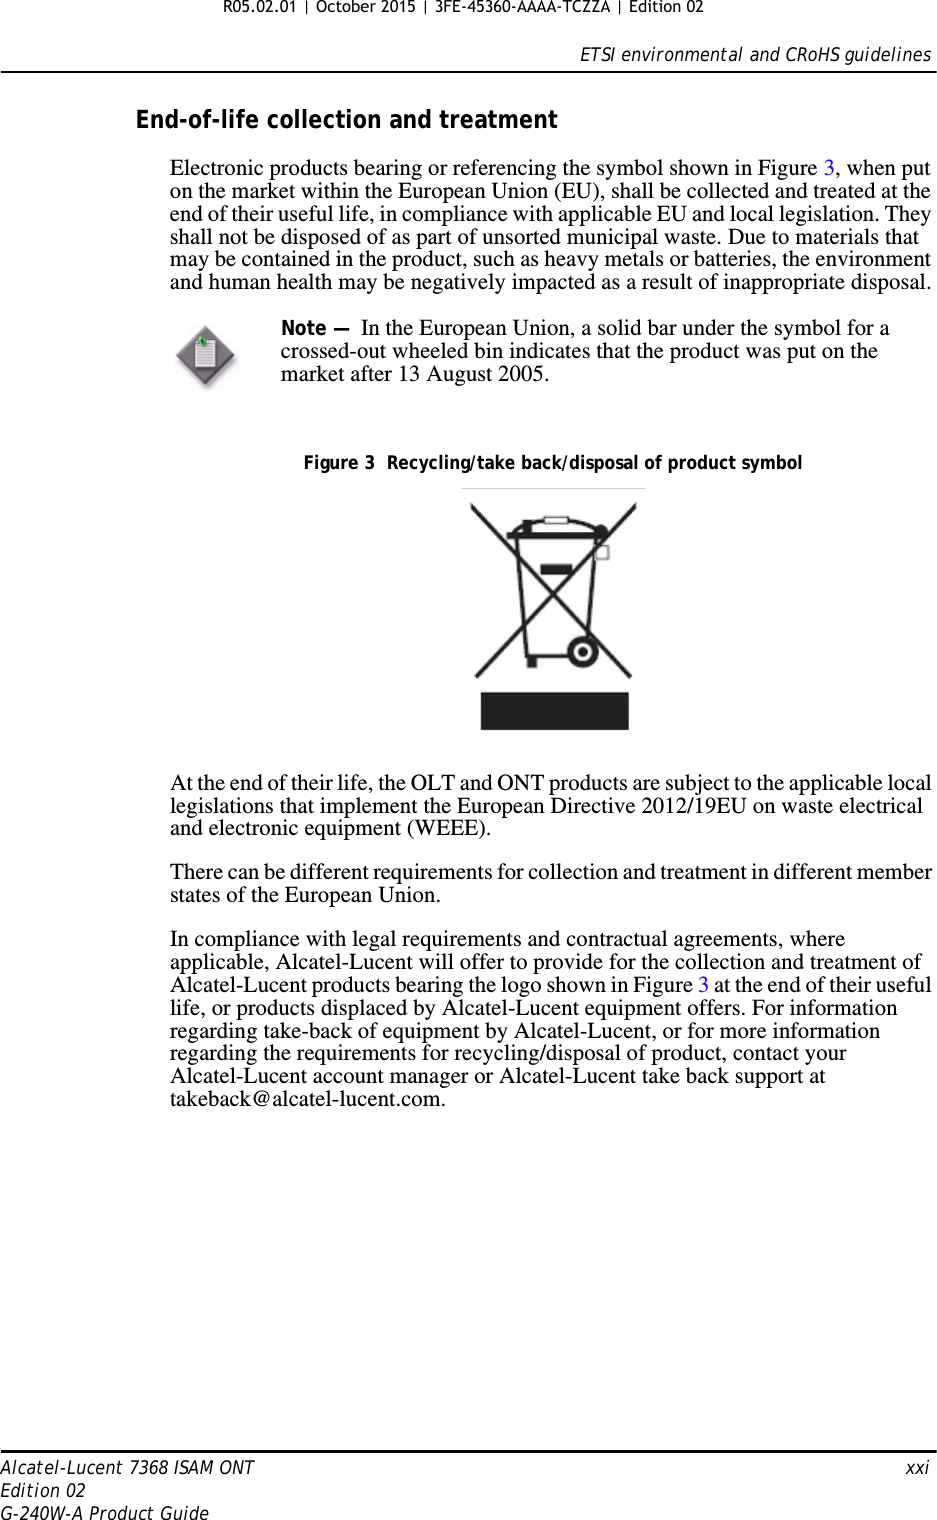 ETSI environmental and CRoHS guidelinesAlcatel-Lucent 7368 ISAM ONT   xxiEdition 02G-240W-A Product GuideEnd-of-life collection and treatmentElectronic products bearing or referencing the symbol shown in Figure 3, when put on the market within the European Union (EU), shall be collected and treated at the end of their useful life, in compliance with applicable EU and local legislation. They shall not be disposed of as part of unsorted municipal waste. Due to materials that may be contained in the product, such as heavy metals or batteries, the environment and human health may be negatively impacted as a result of inappropriate disposal.Figure 3  Recycling/take back/disposal of product symbolAt the end of their life, the OLT and ONT products are subject to the applicable local legislations that implement the European Directive 2012/19EU on waste electrical and electronic equipment (WEEE).There can be different requirements for collection and treatment in different member states of the European Union. In compliance with legal requirements and contractual agreements, where applicable, Alcatel-Lucent will offer to provide for the collection and treatment of Alcatel-Lucent products bearing the logo shown in Figure 3 at the end of their useful life, or products displaced by Alcatel-Lucent equipment offers. For information regarding take-back of equipment by Alcatel-Lucent, or for more information regarding the requirements for recycling/disposal of product, contact your Alcatel-Lucent account manager or Alcatel-Lucent take back support at takeback@alcatel-lucent.com.Note —  In the European Union, a solid bar under the symbol for a crossed-out wheeled bin indicates that the product was put on the market after 13 August 2005. R05.02.01 | October 2015 | 3FE-45360-AAAA-TCZZA | Edition 02 